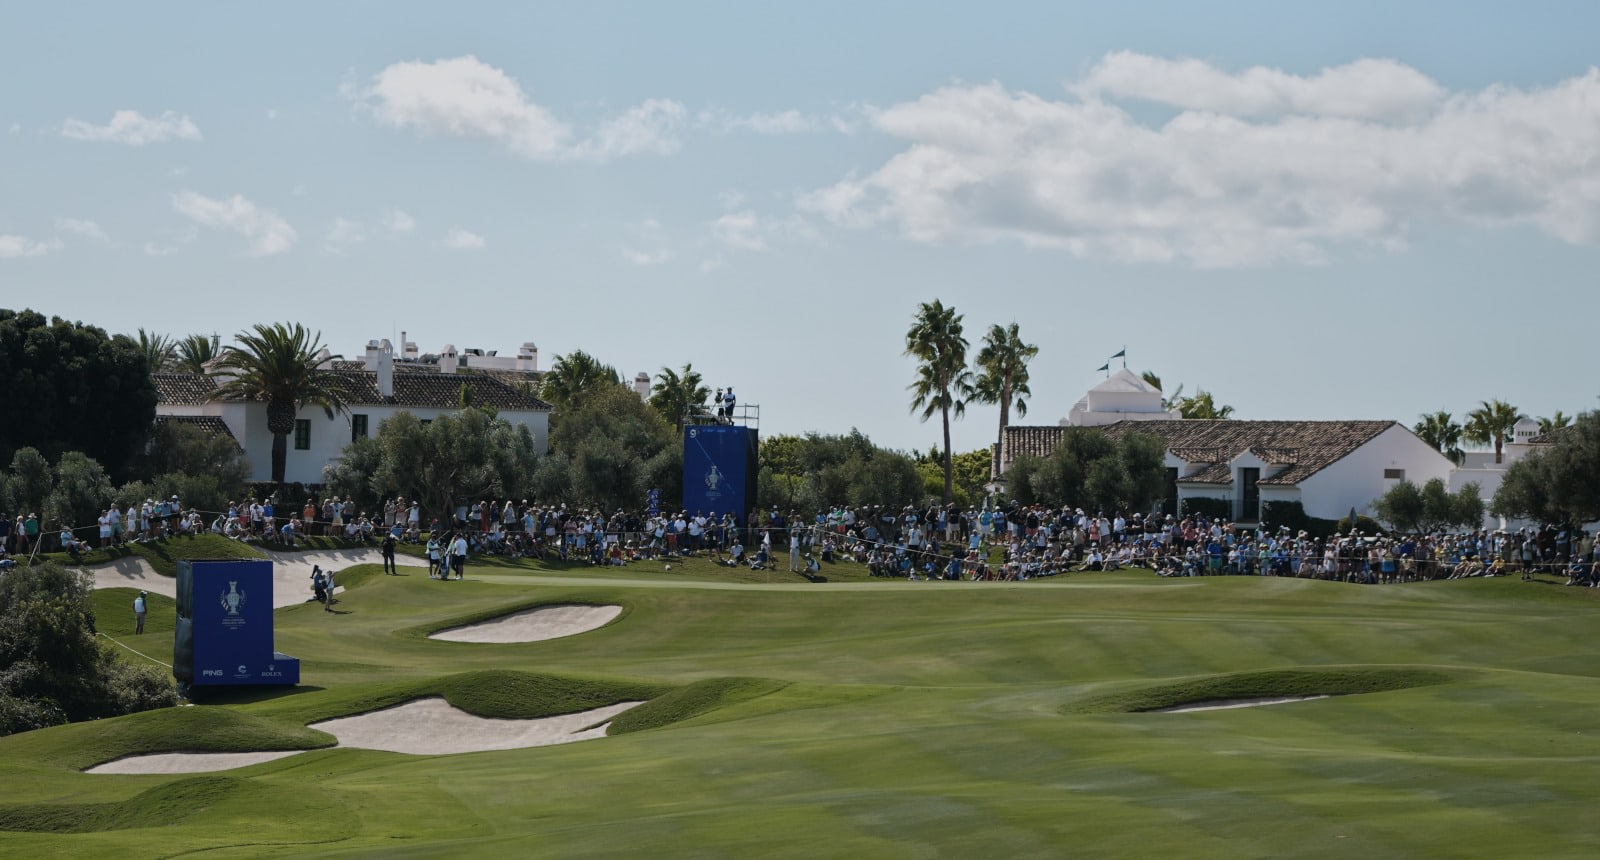 The 9th hole at Finca Cortesin during the 2023 Solheim Cup